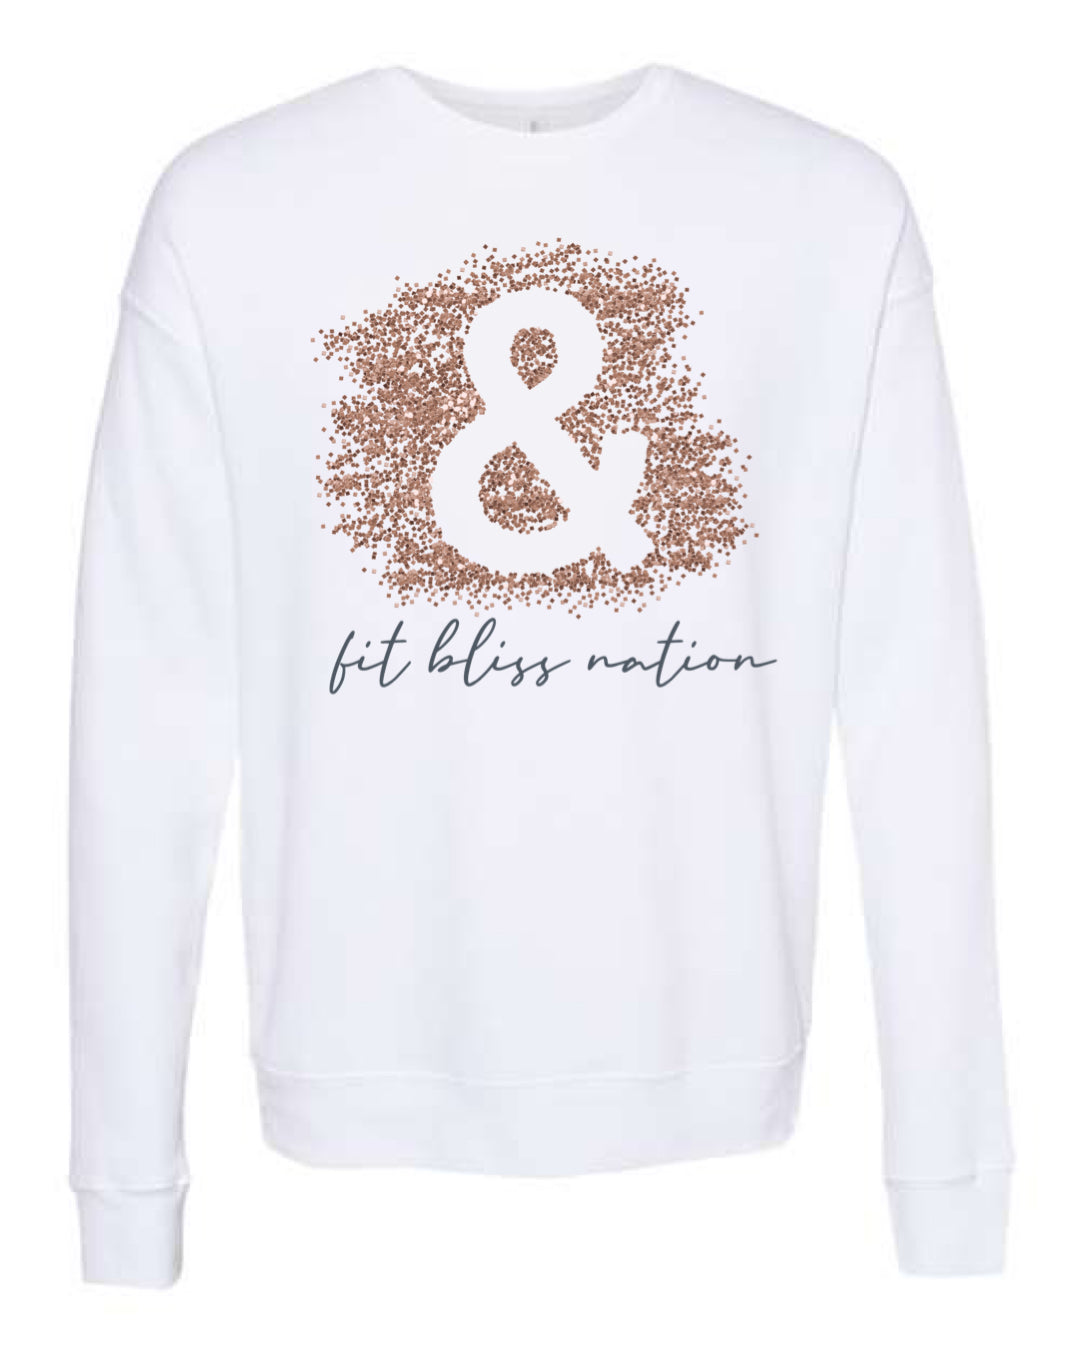 FIT BLISS NATION UNISEX CREW